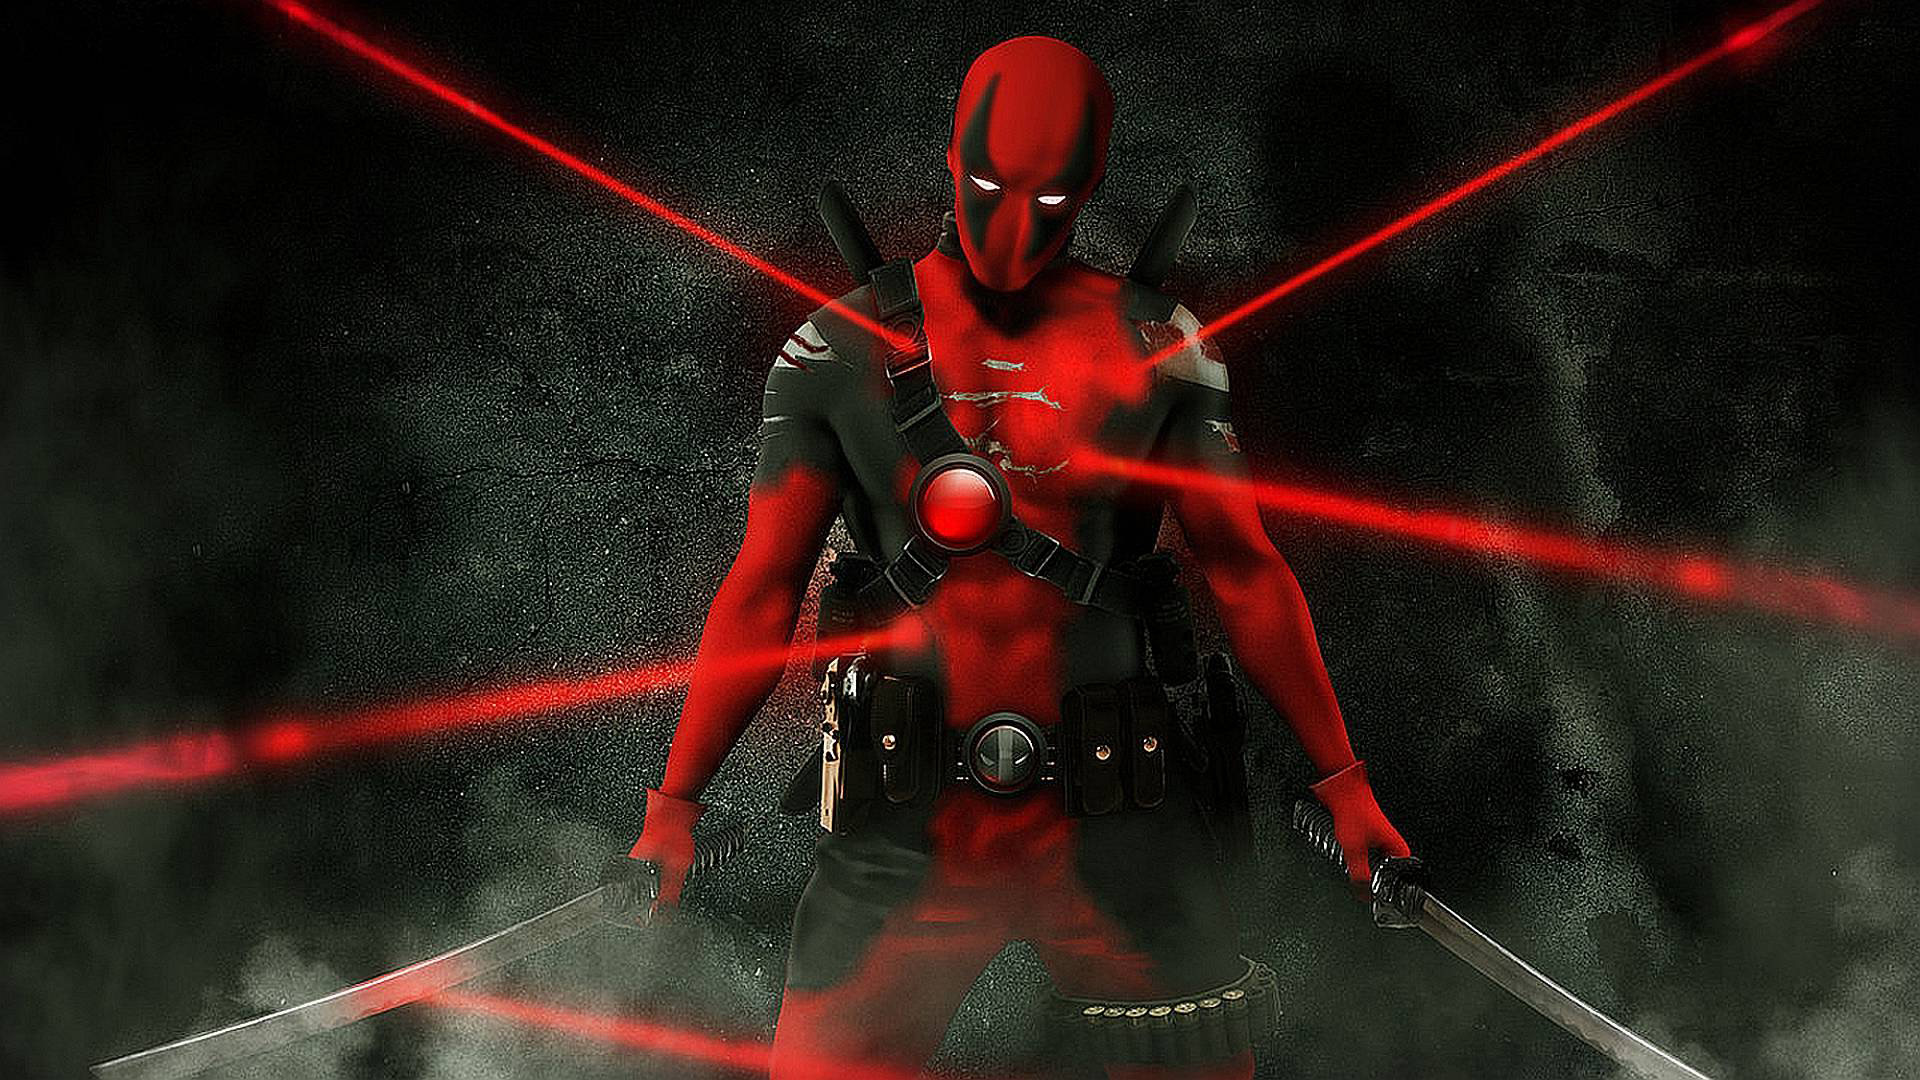  November 9 2015 By Stephen Comments Off on Deadpool Movie Wallpaper